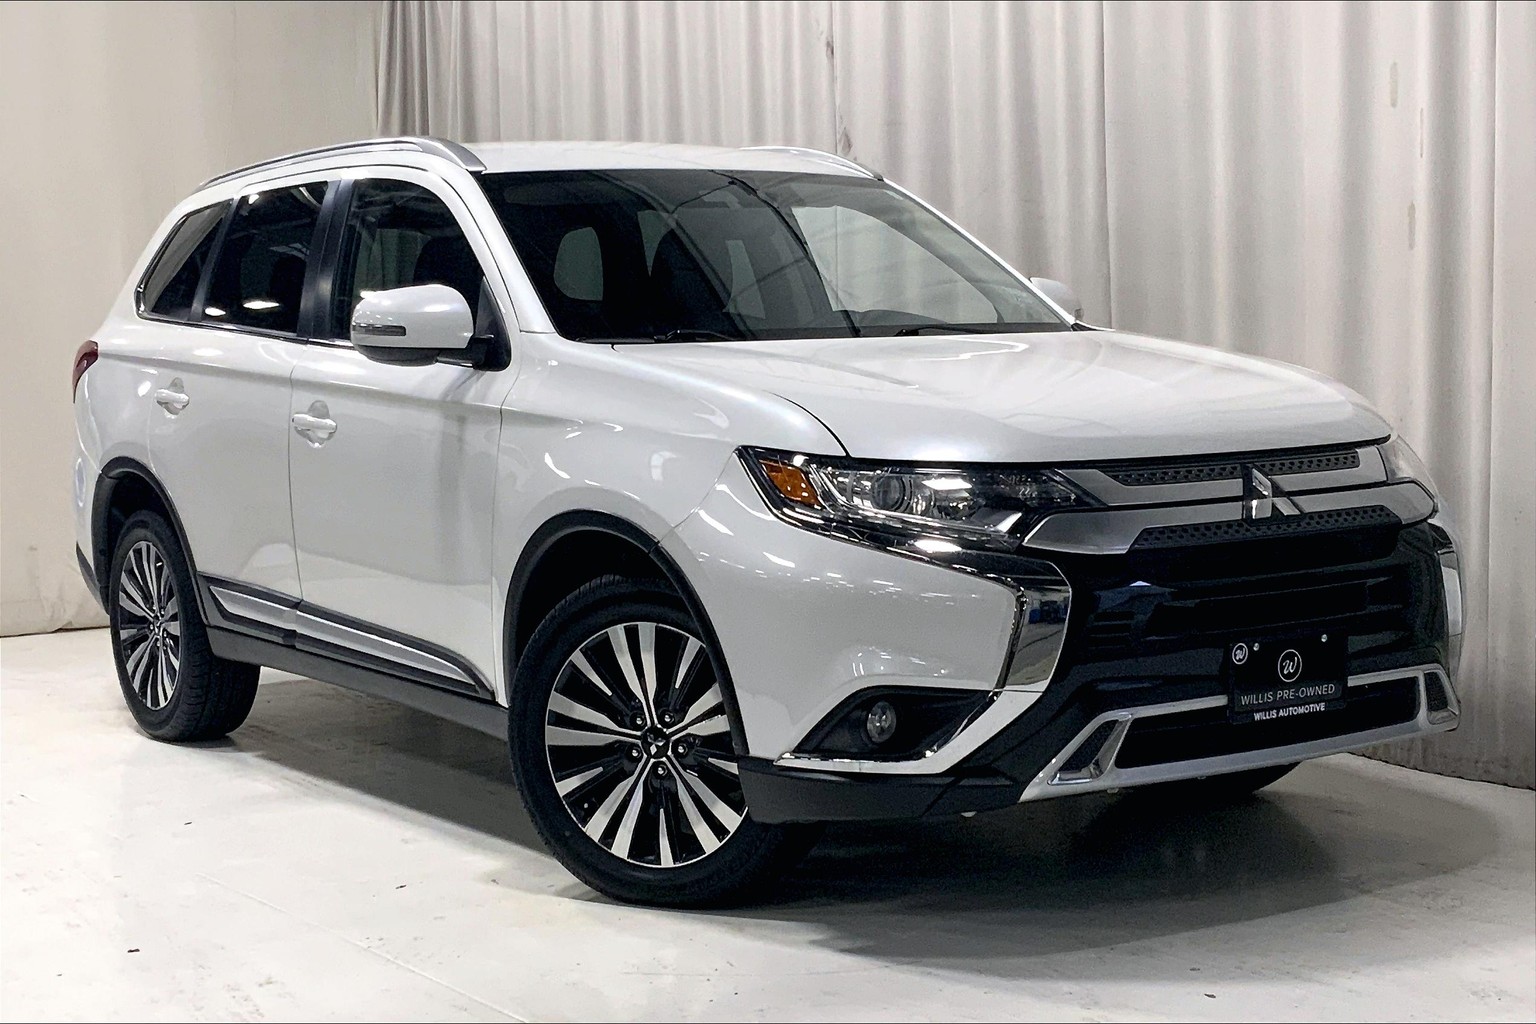 Pre-Owned 2020 Mitsubishi Outlander SEL 4D Sport Utility in Clive #BX0831  Willis Automotive